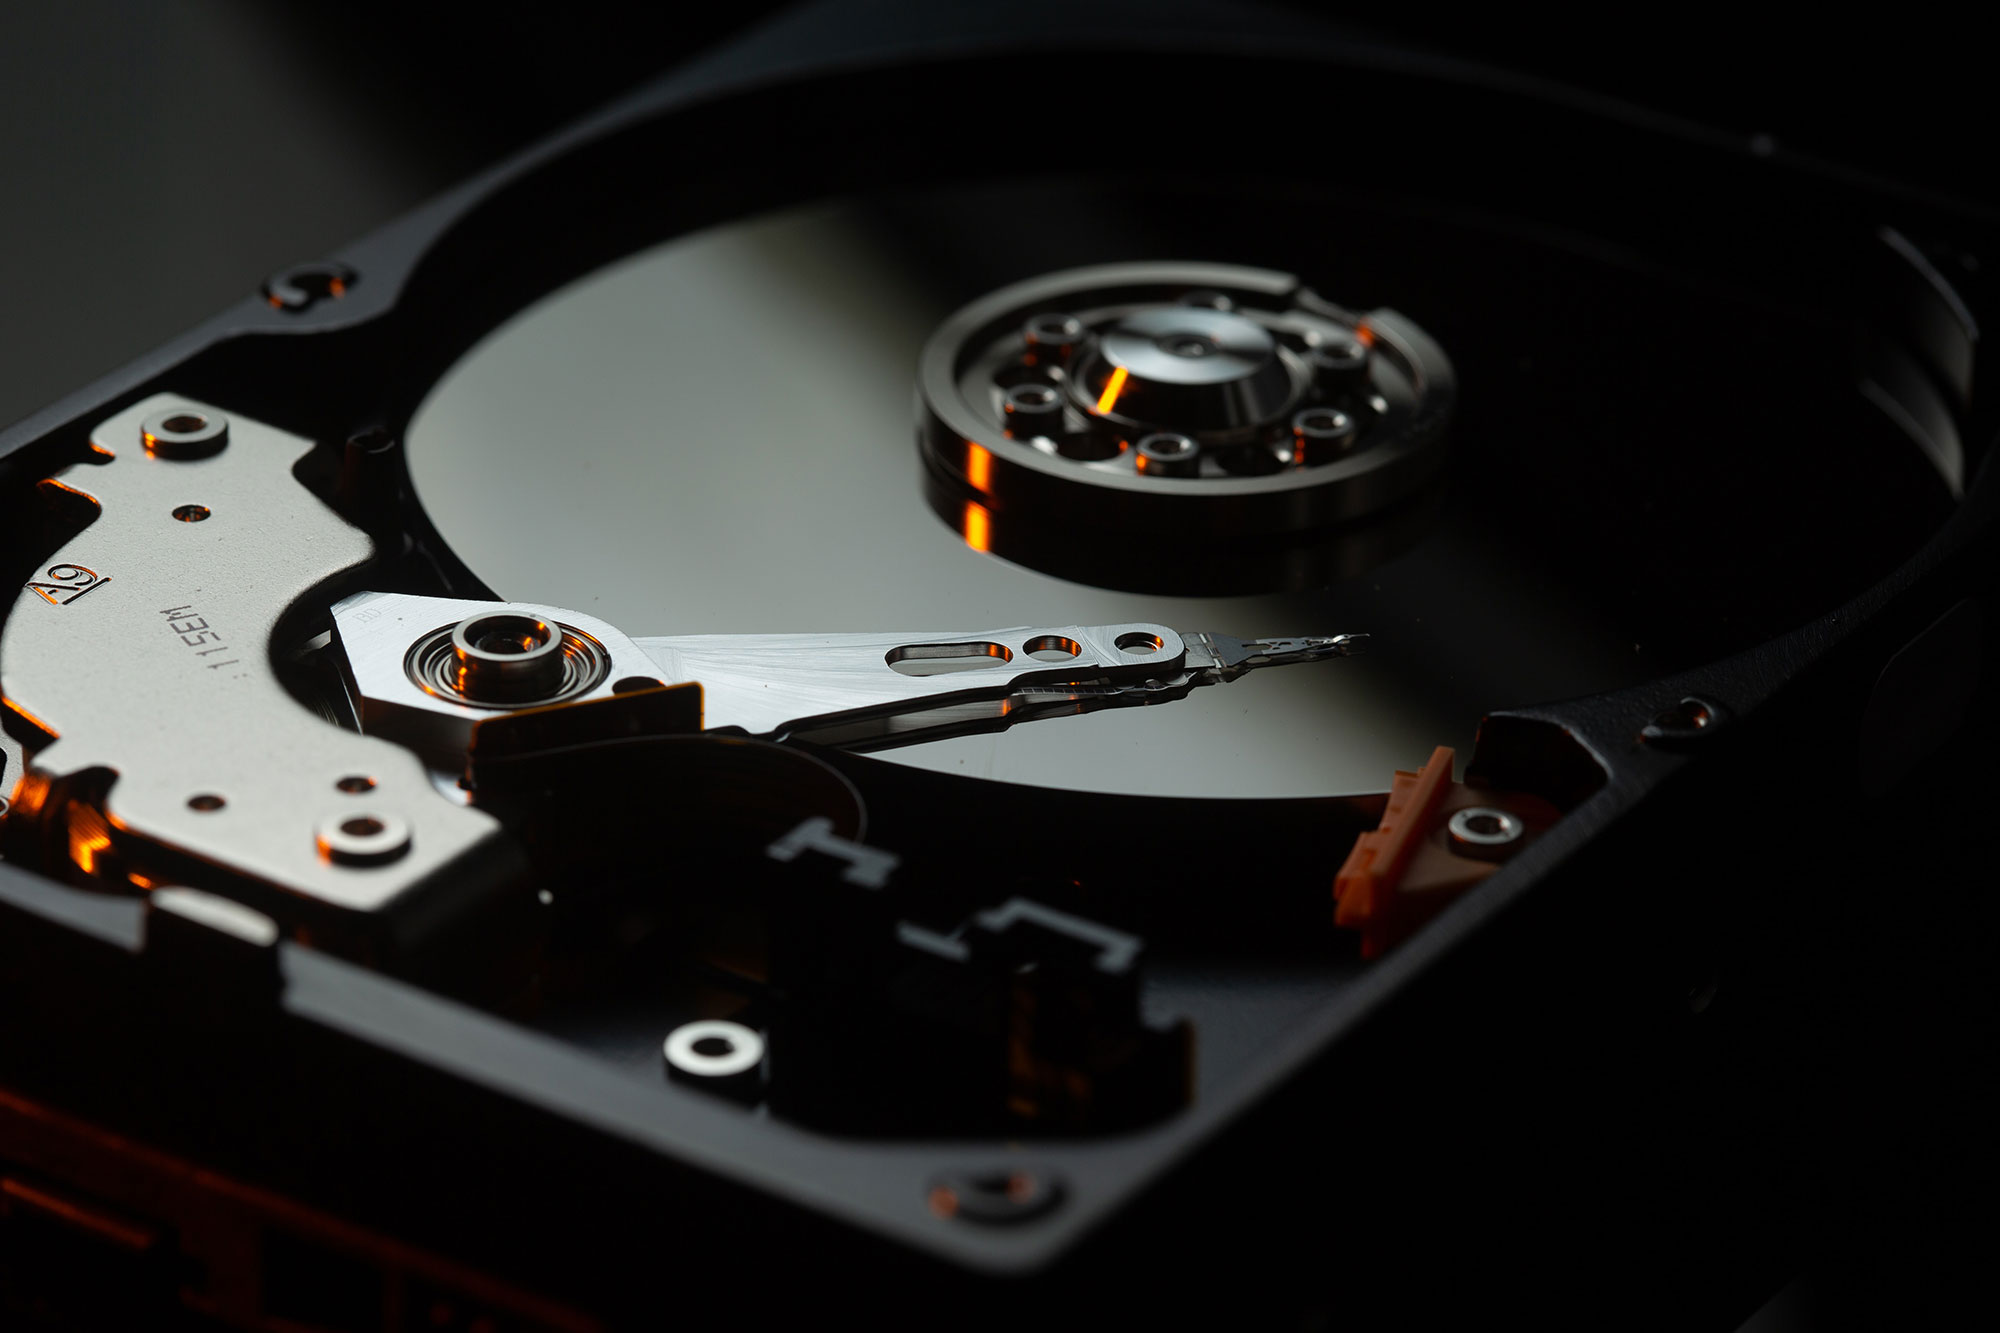 A hard disk drive that showcases the inner components.